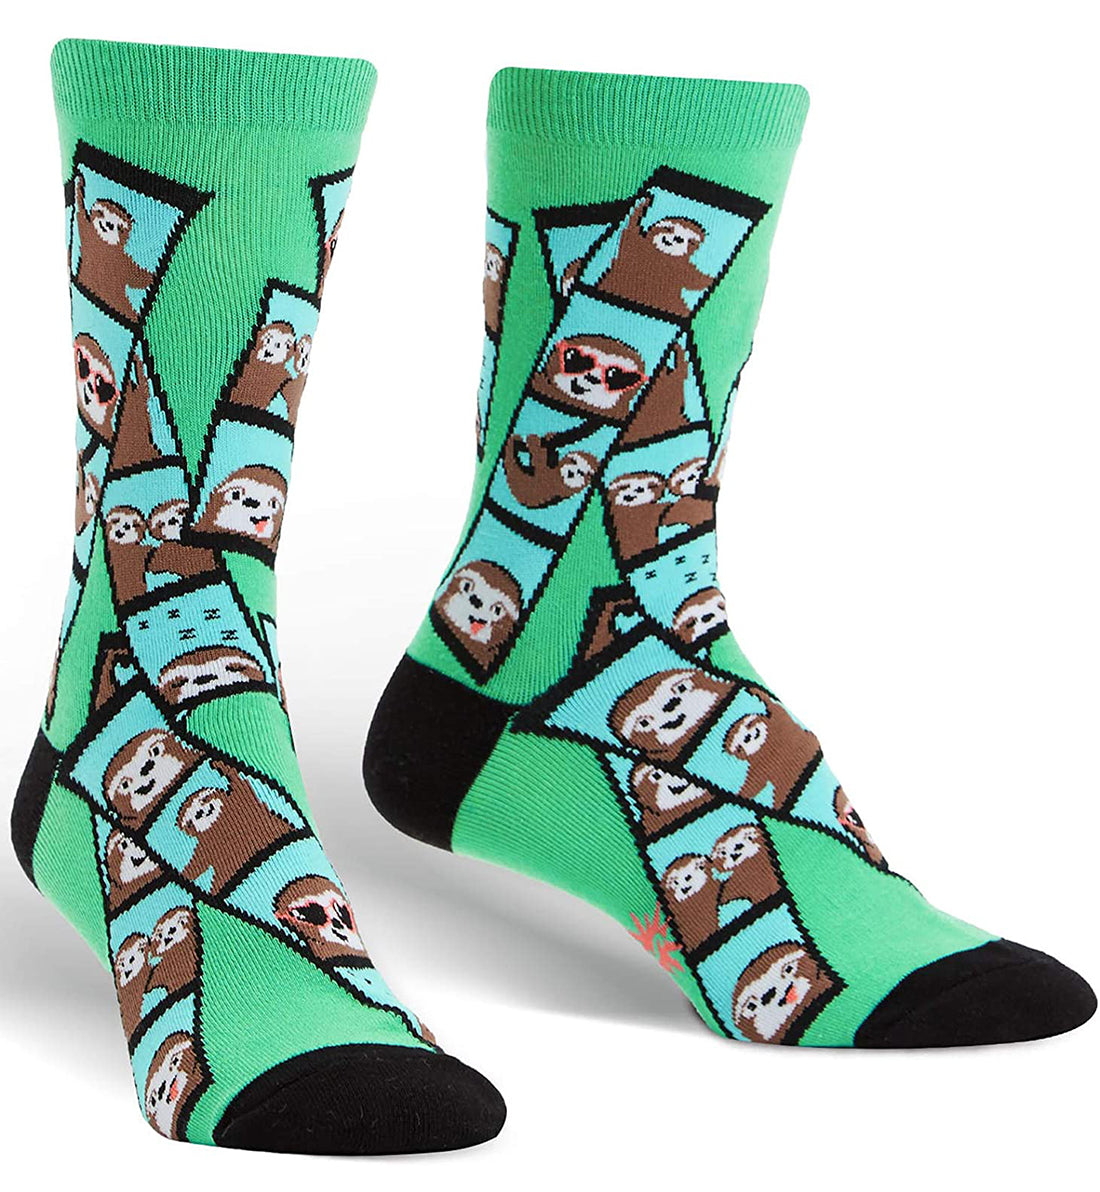 SOCK it to me Women's Crew Socks (w0215),Oh Snap! - Oh Snap!,One Size